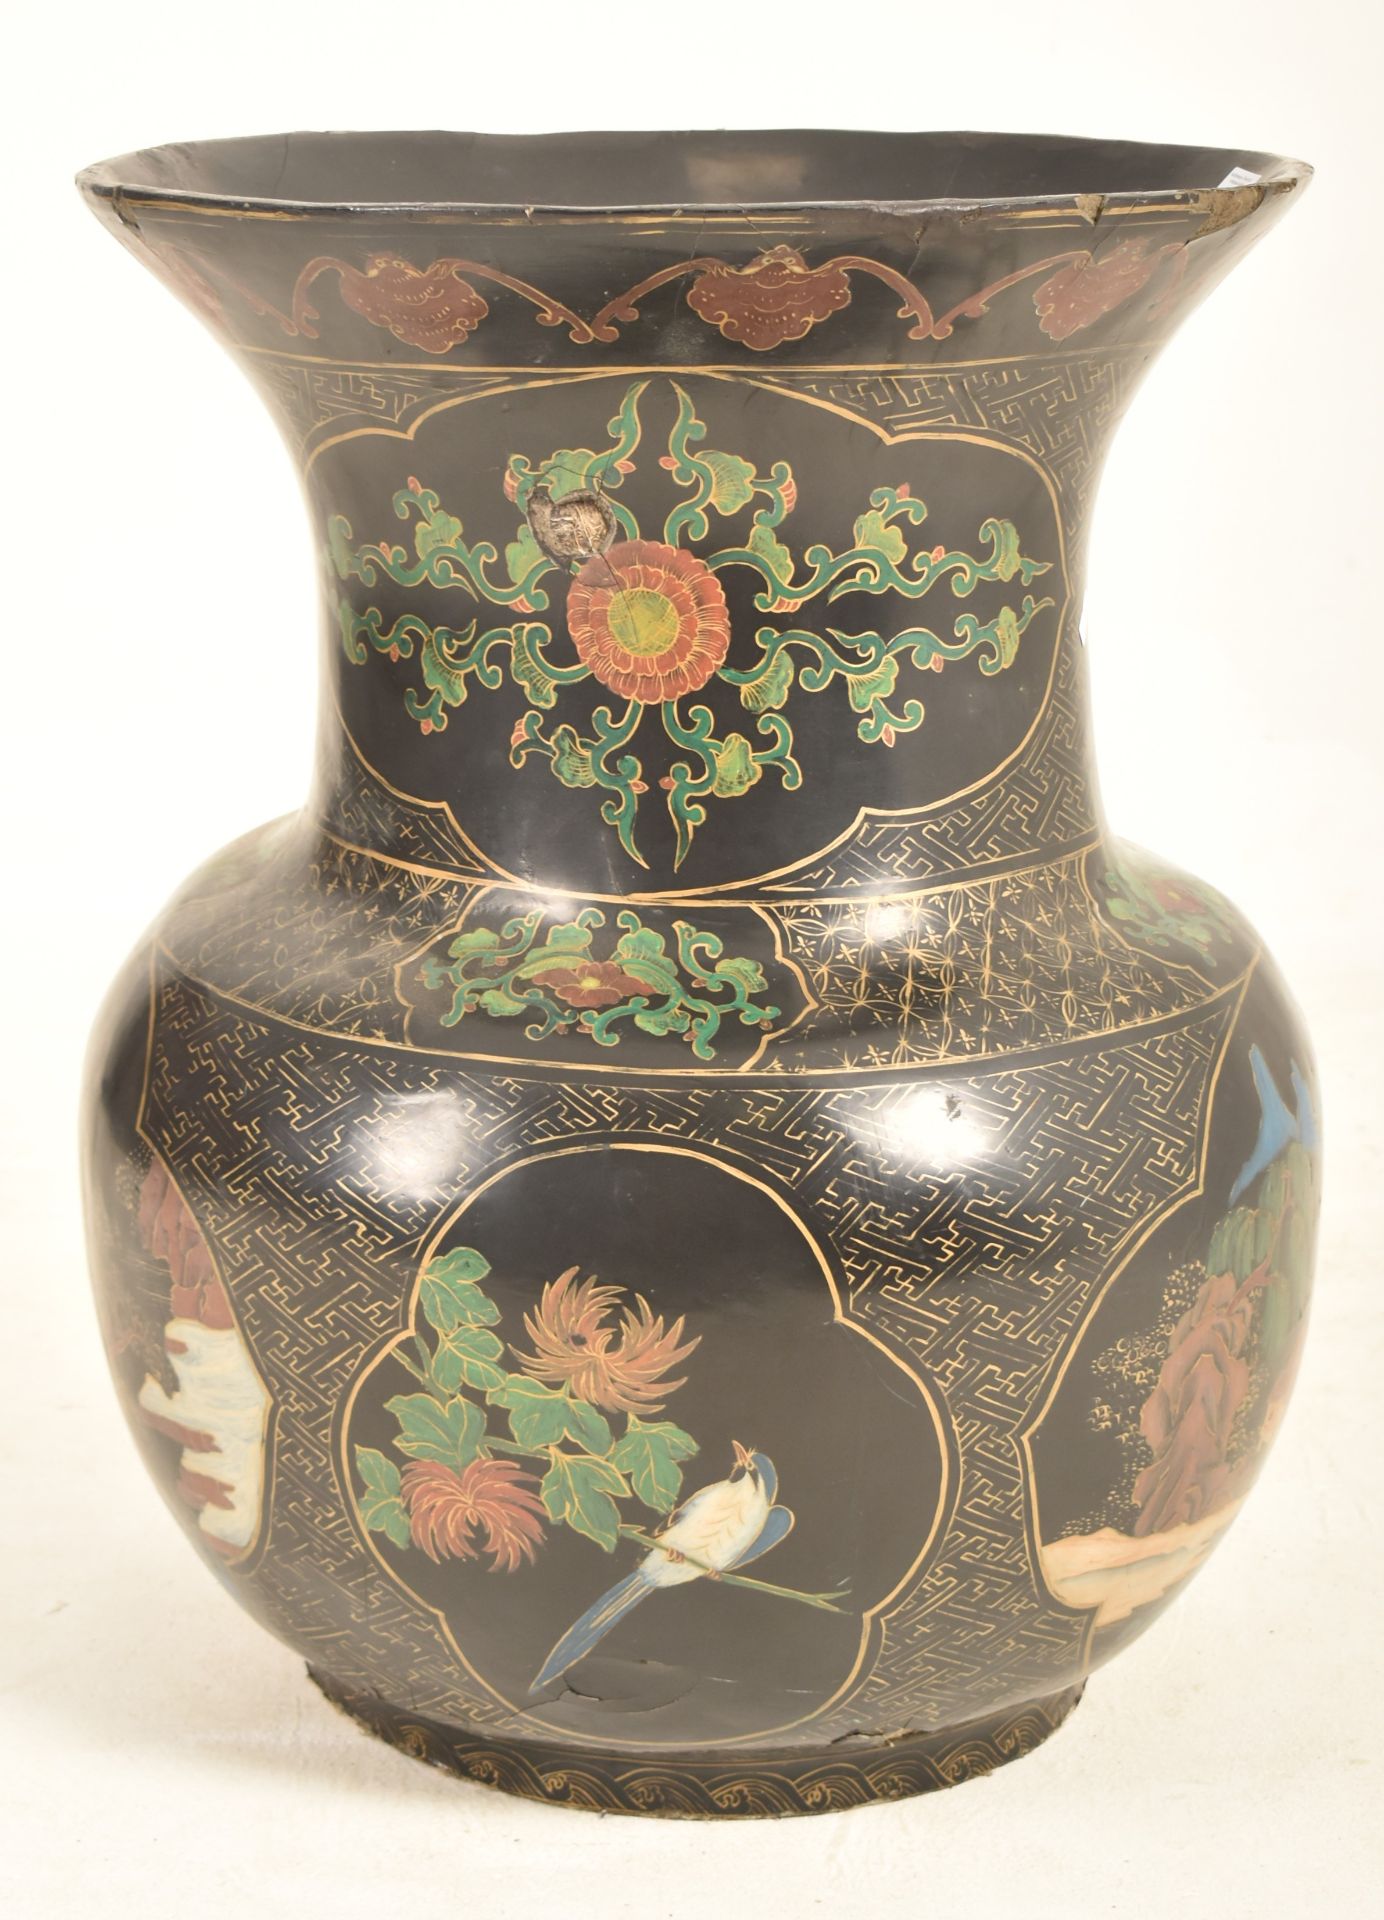 LARGE CHINESE EARLY 20TH CENTURY LACQUERED FLOOR VASE - Image 5 of 6